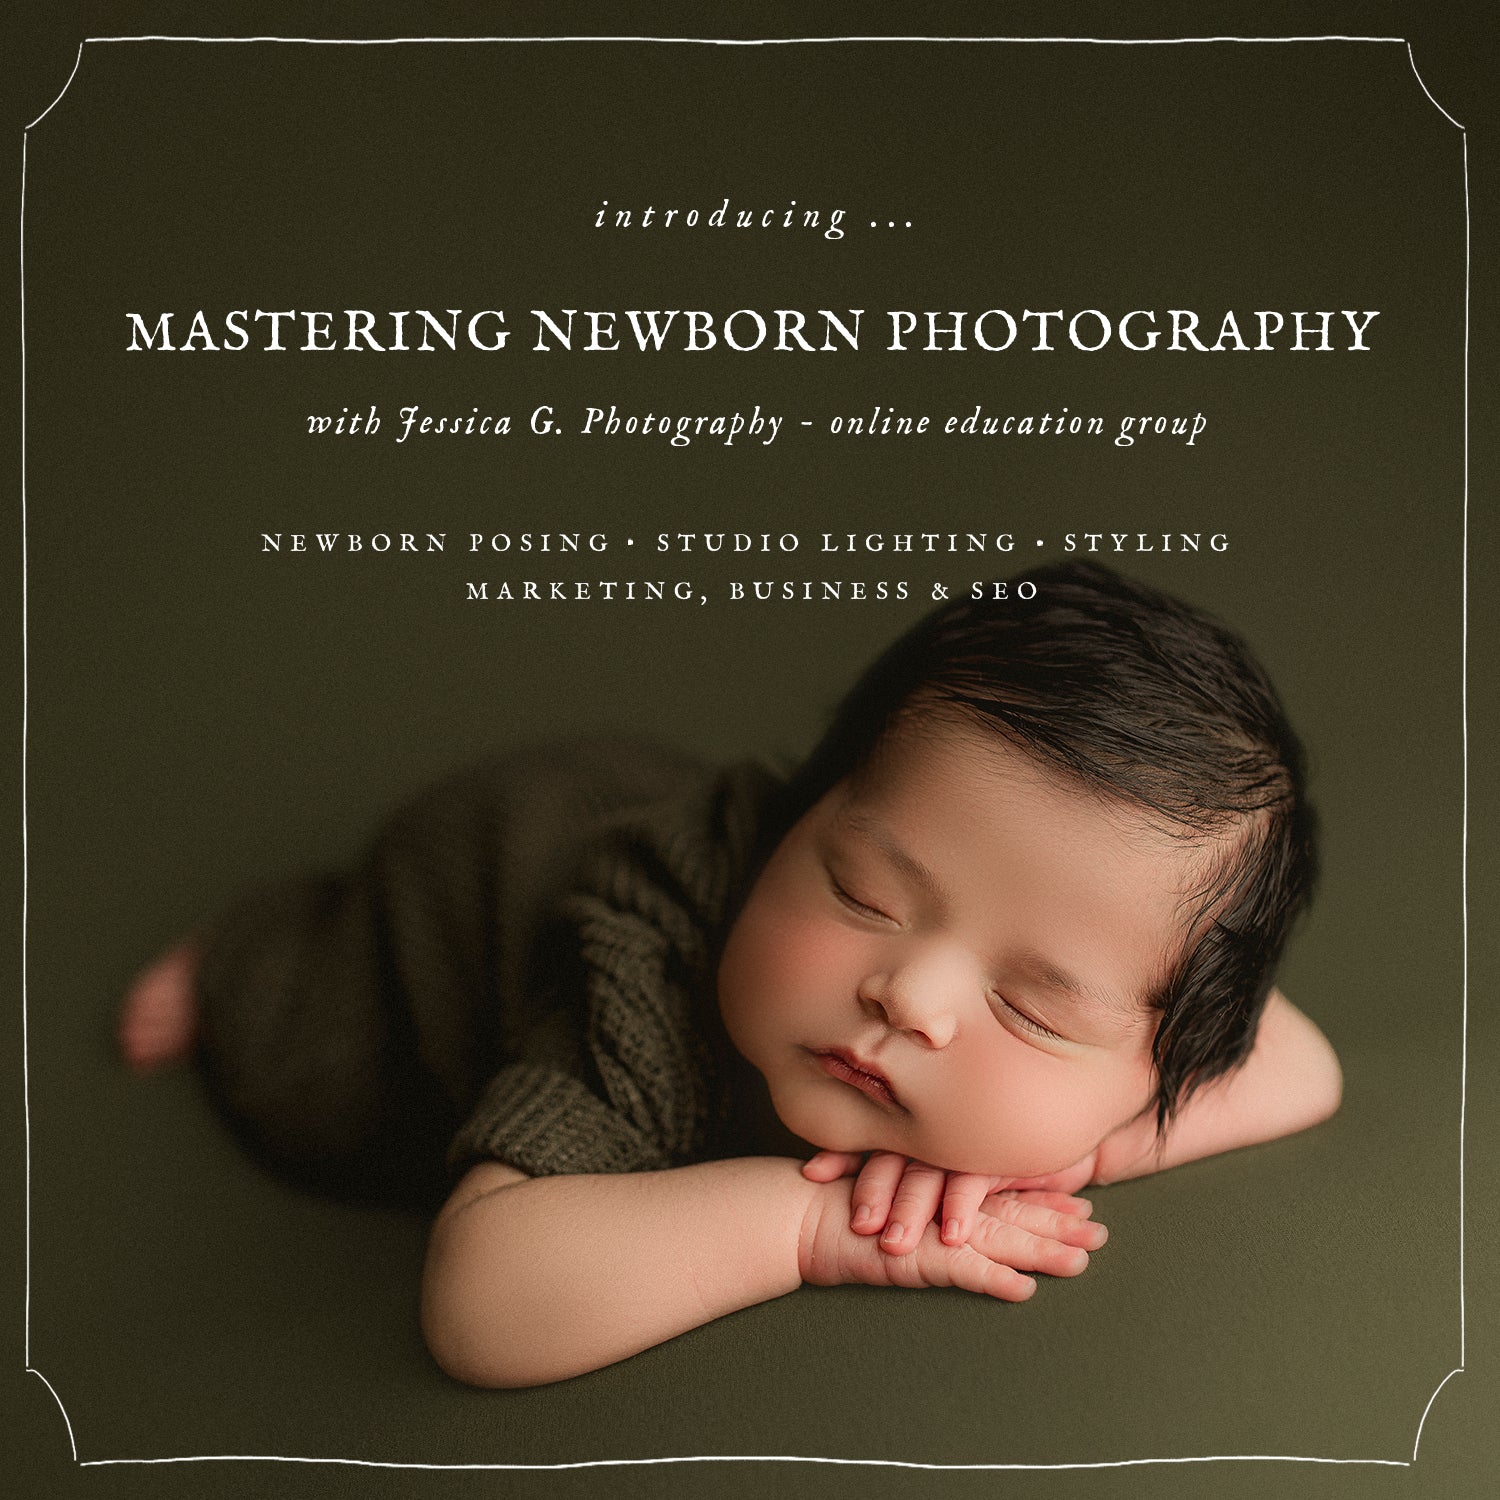 MN Classes and workshops. Newborn posing classes in MN and worldwide | Kari  Layland - MN portrait photographer Blog